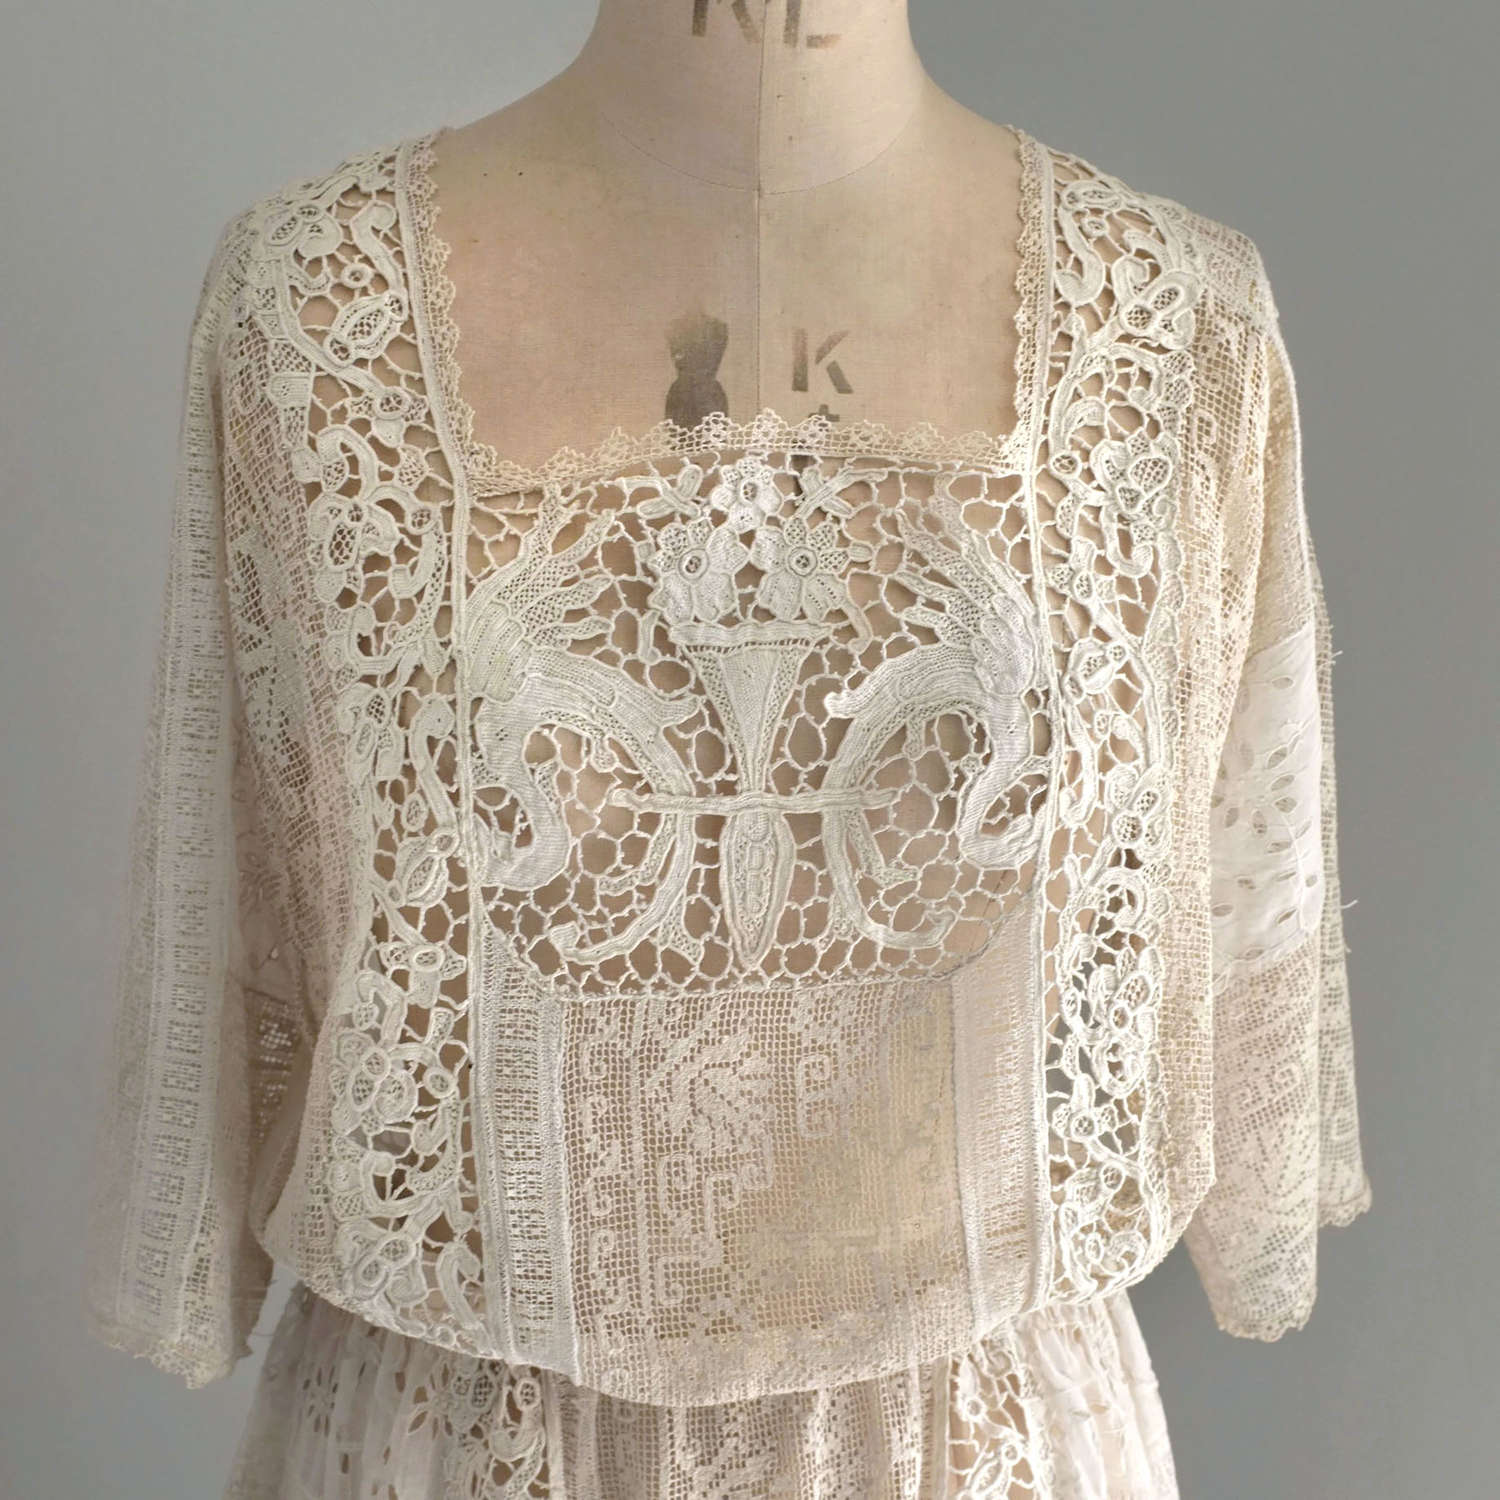 Antique Handmade Needlelace and Filet Lace Dress, circa 1920